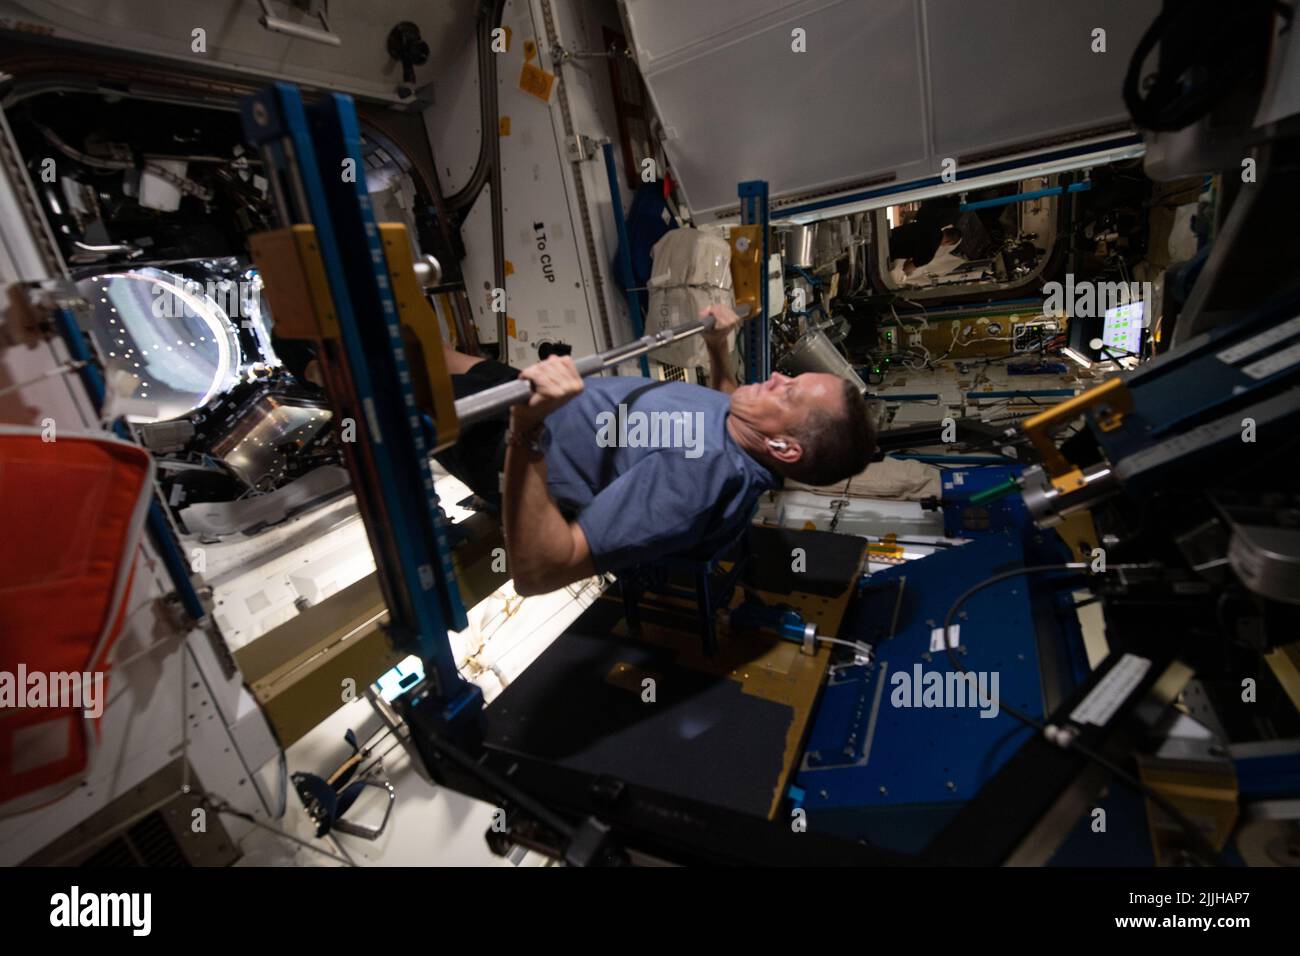 NASA astronaut and Expedition 67 Flight Engineer Bob Hines works out on the Advanced Resistive Exercise Device inside the Tranquility module onboard the International Space Station, July 8, 2022 in Earth Orbit. Stock Photo